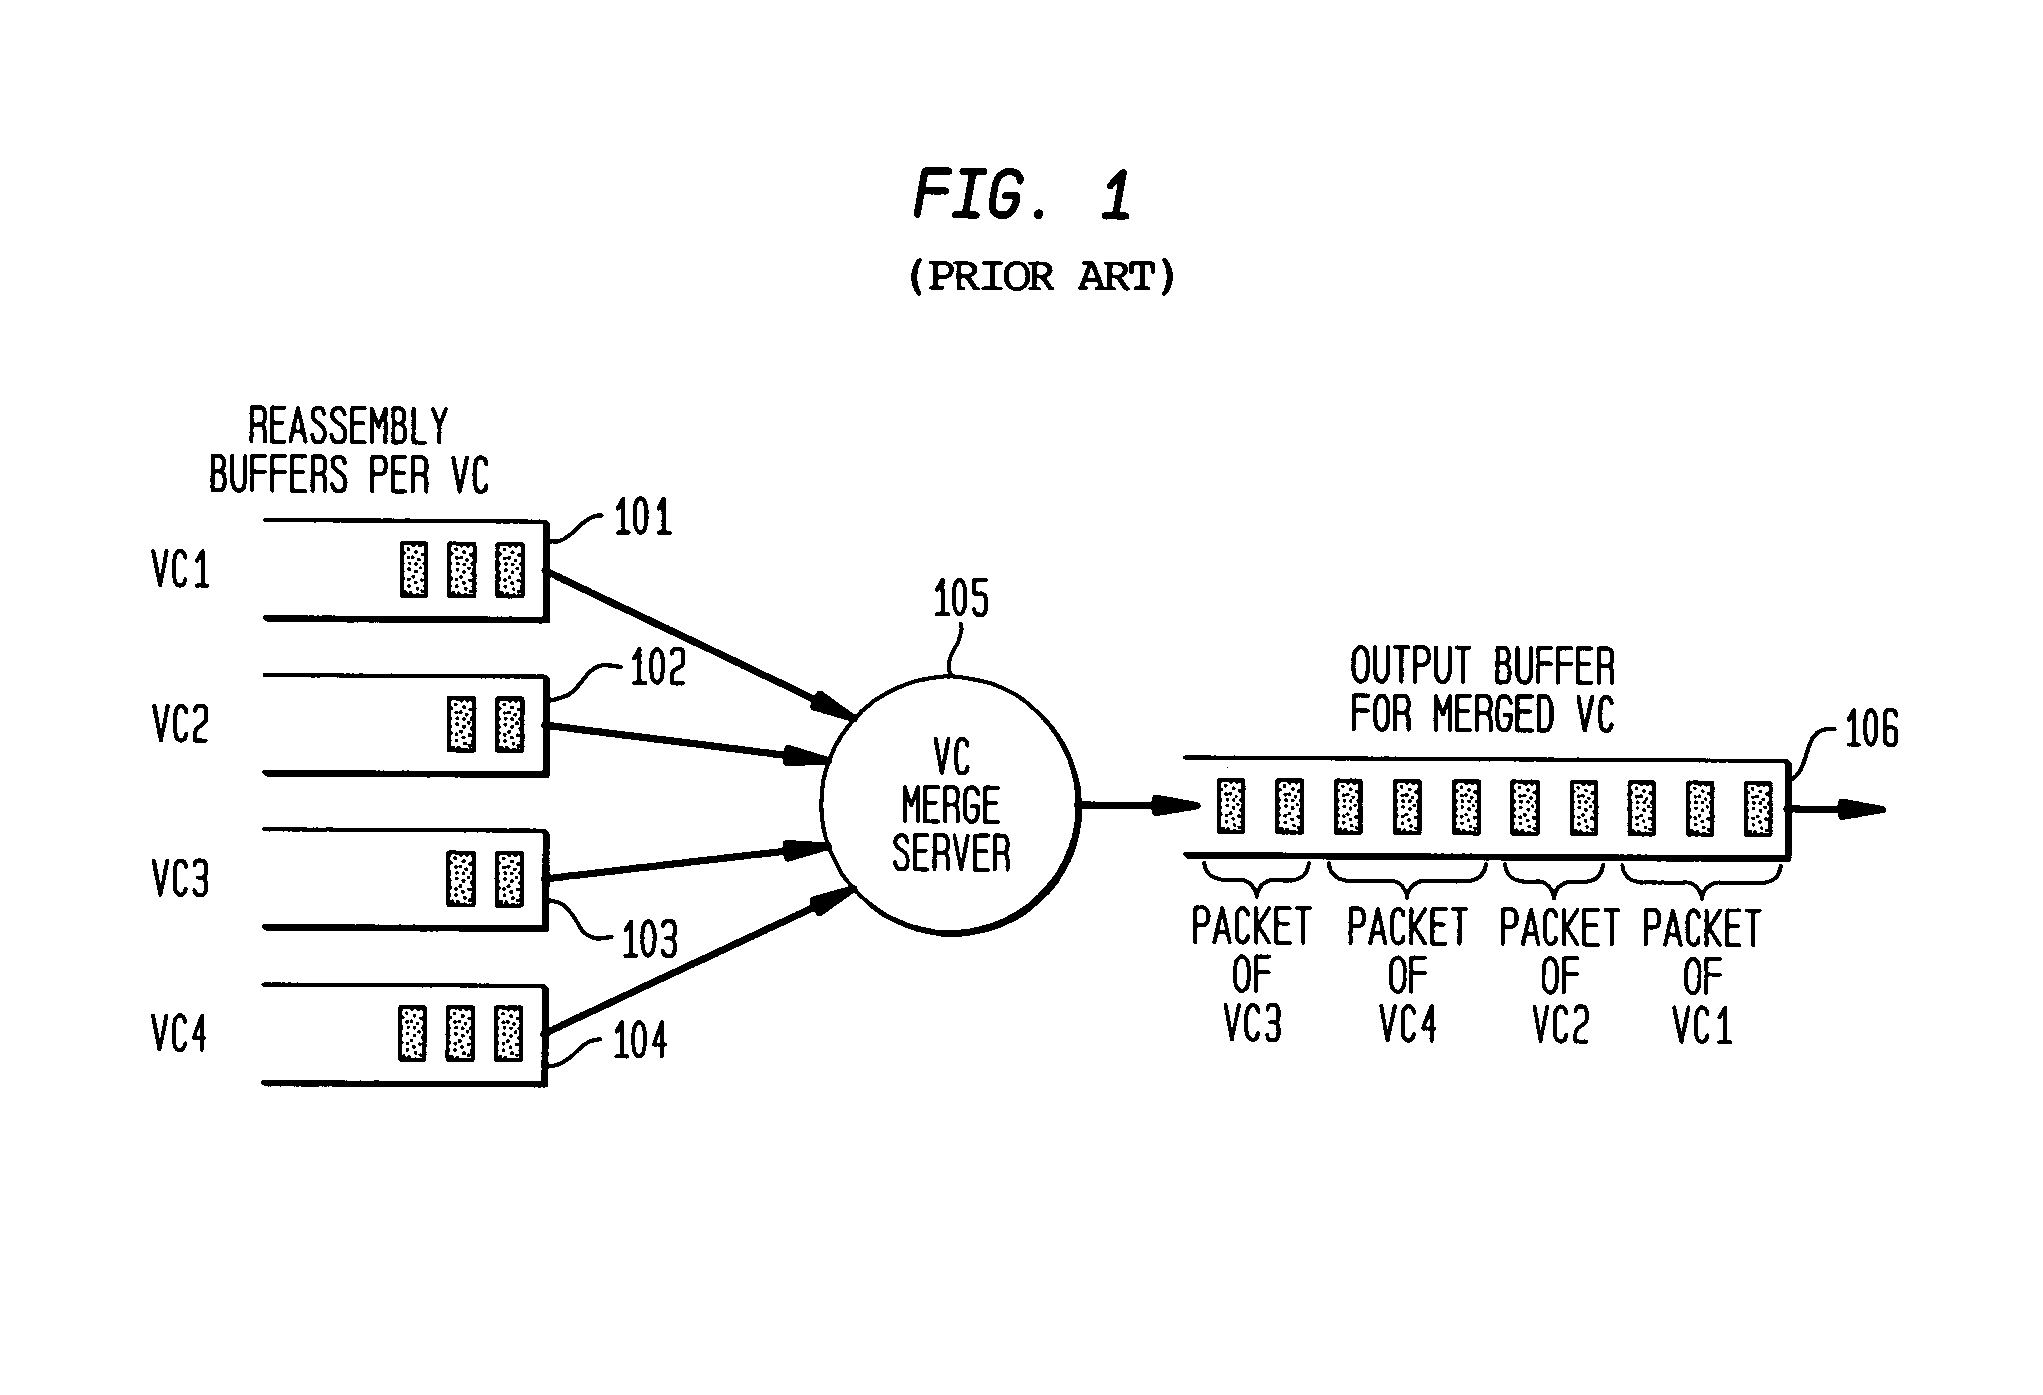 Buffer management for merging packets of virtual circuits